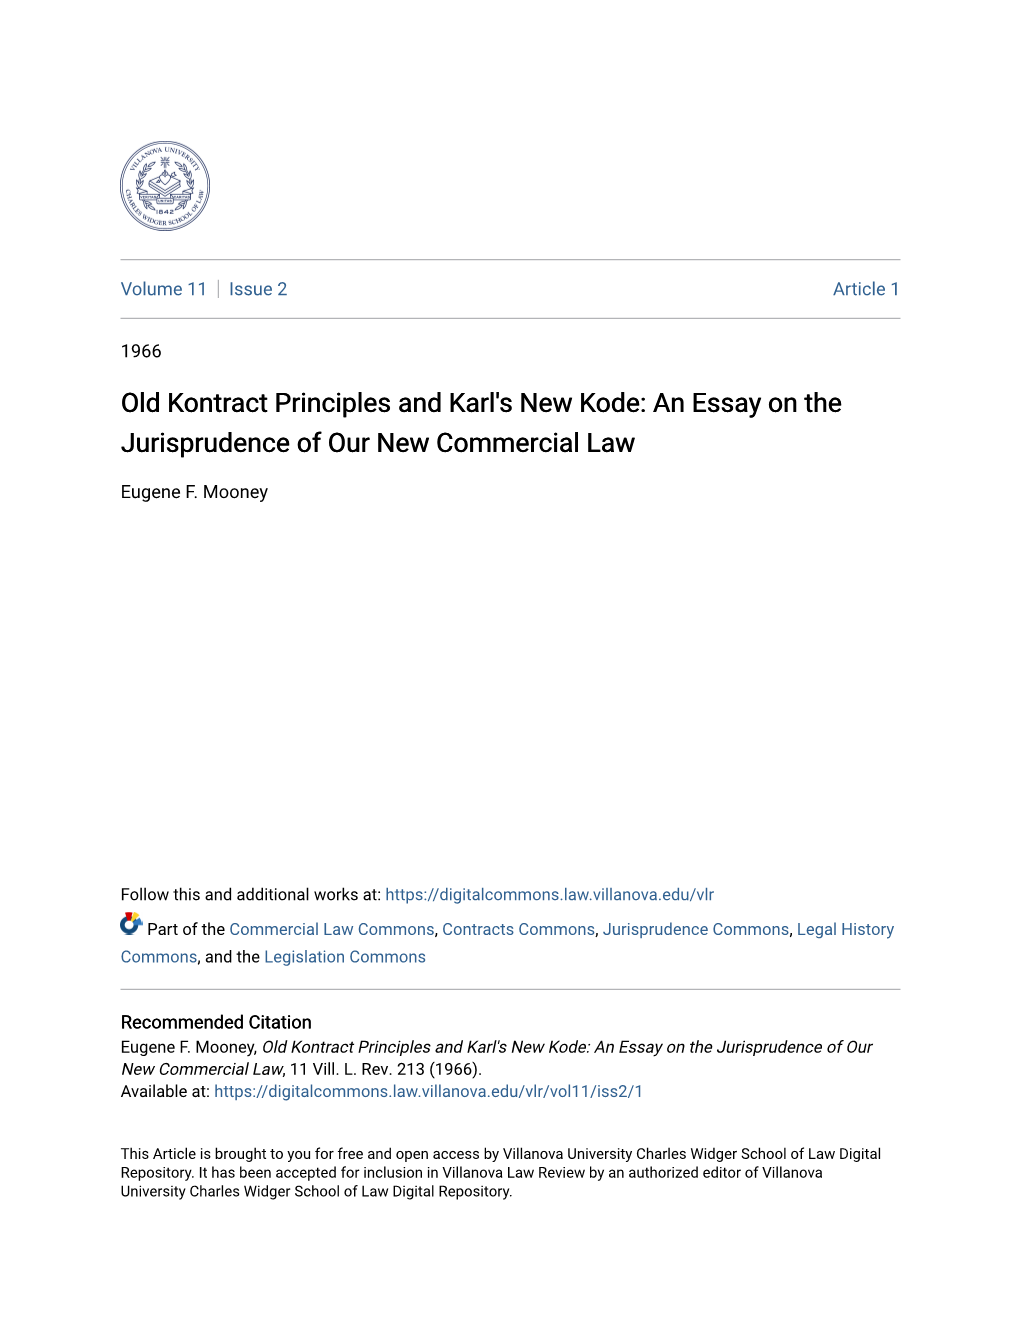 Old Kontract Principles and Karl's New Kode: an Essay on the Jurisprudence of Our New Commercial Law